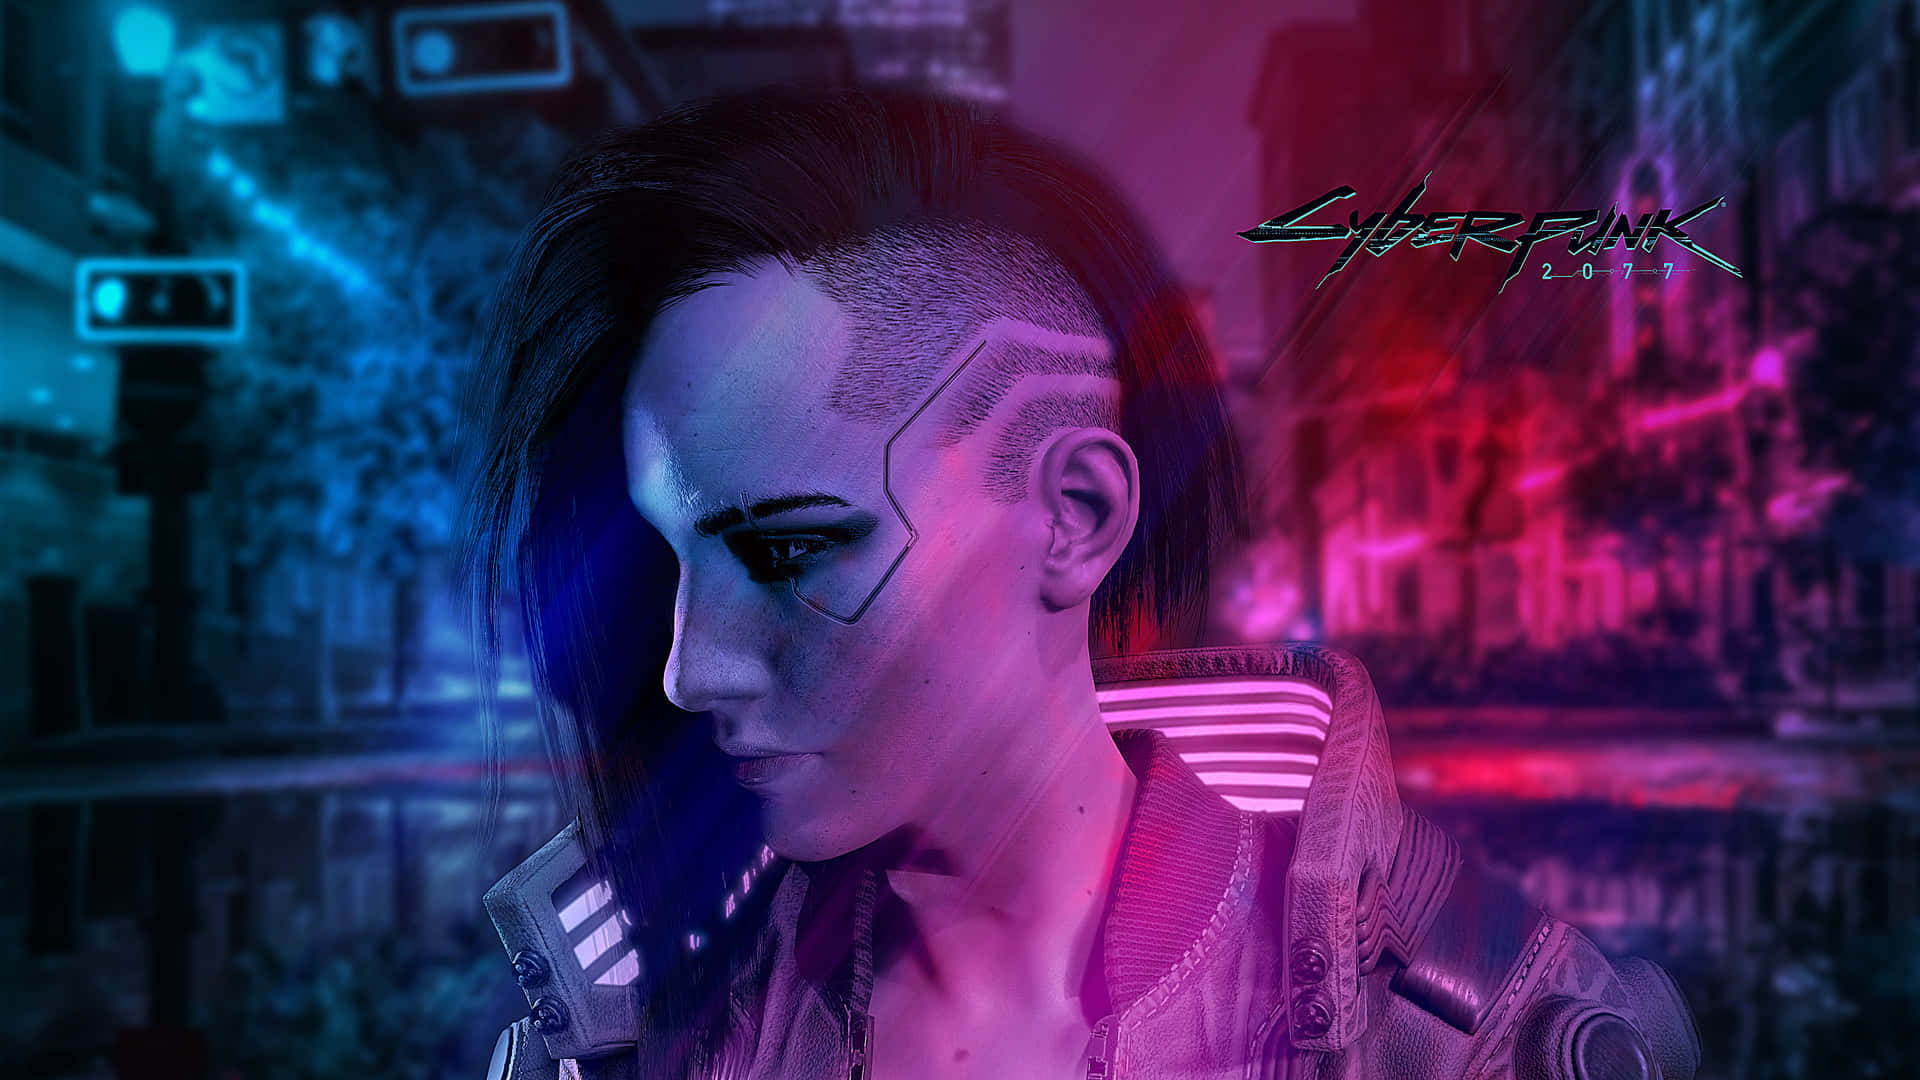 Intriguing Cyberpunk 2077 Characters in Action Wallpaper